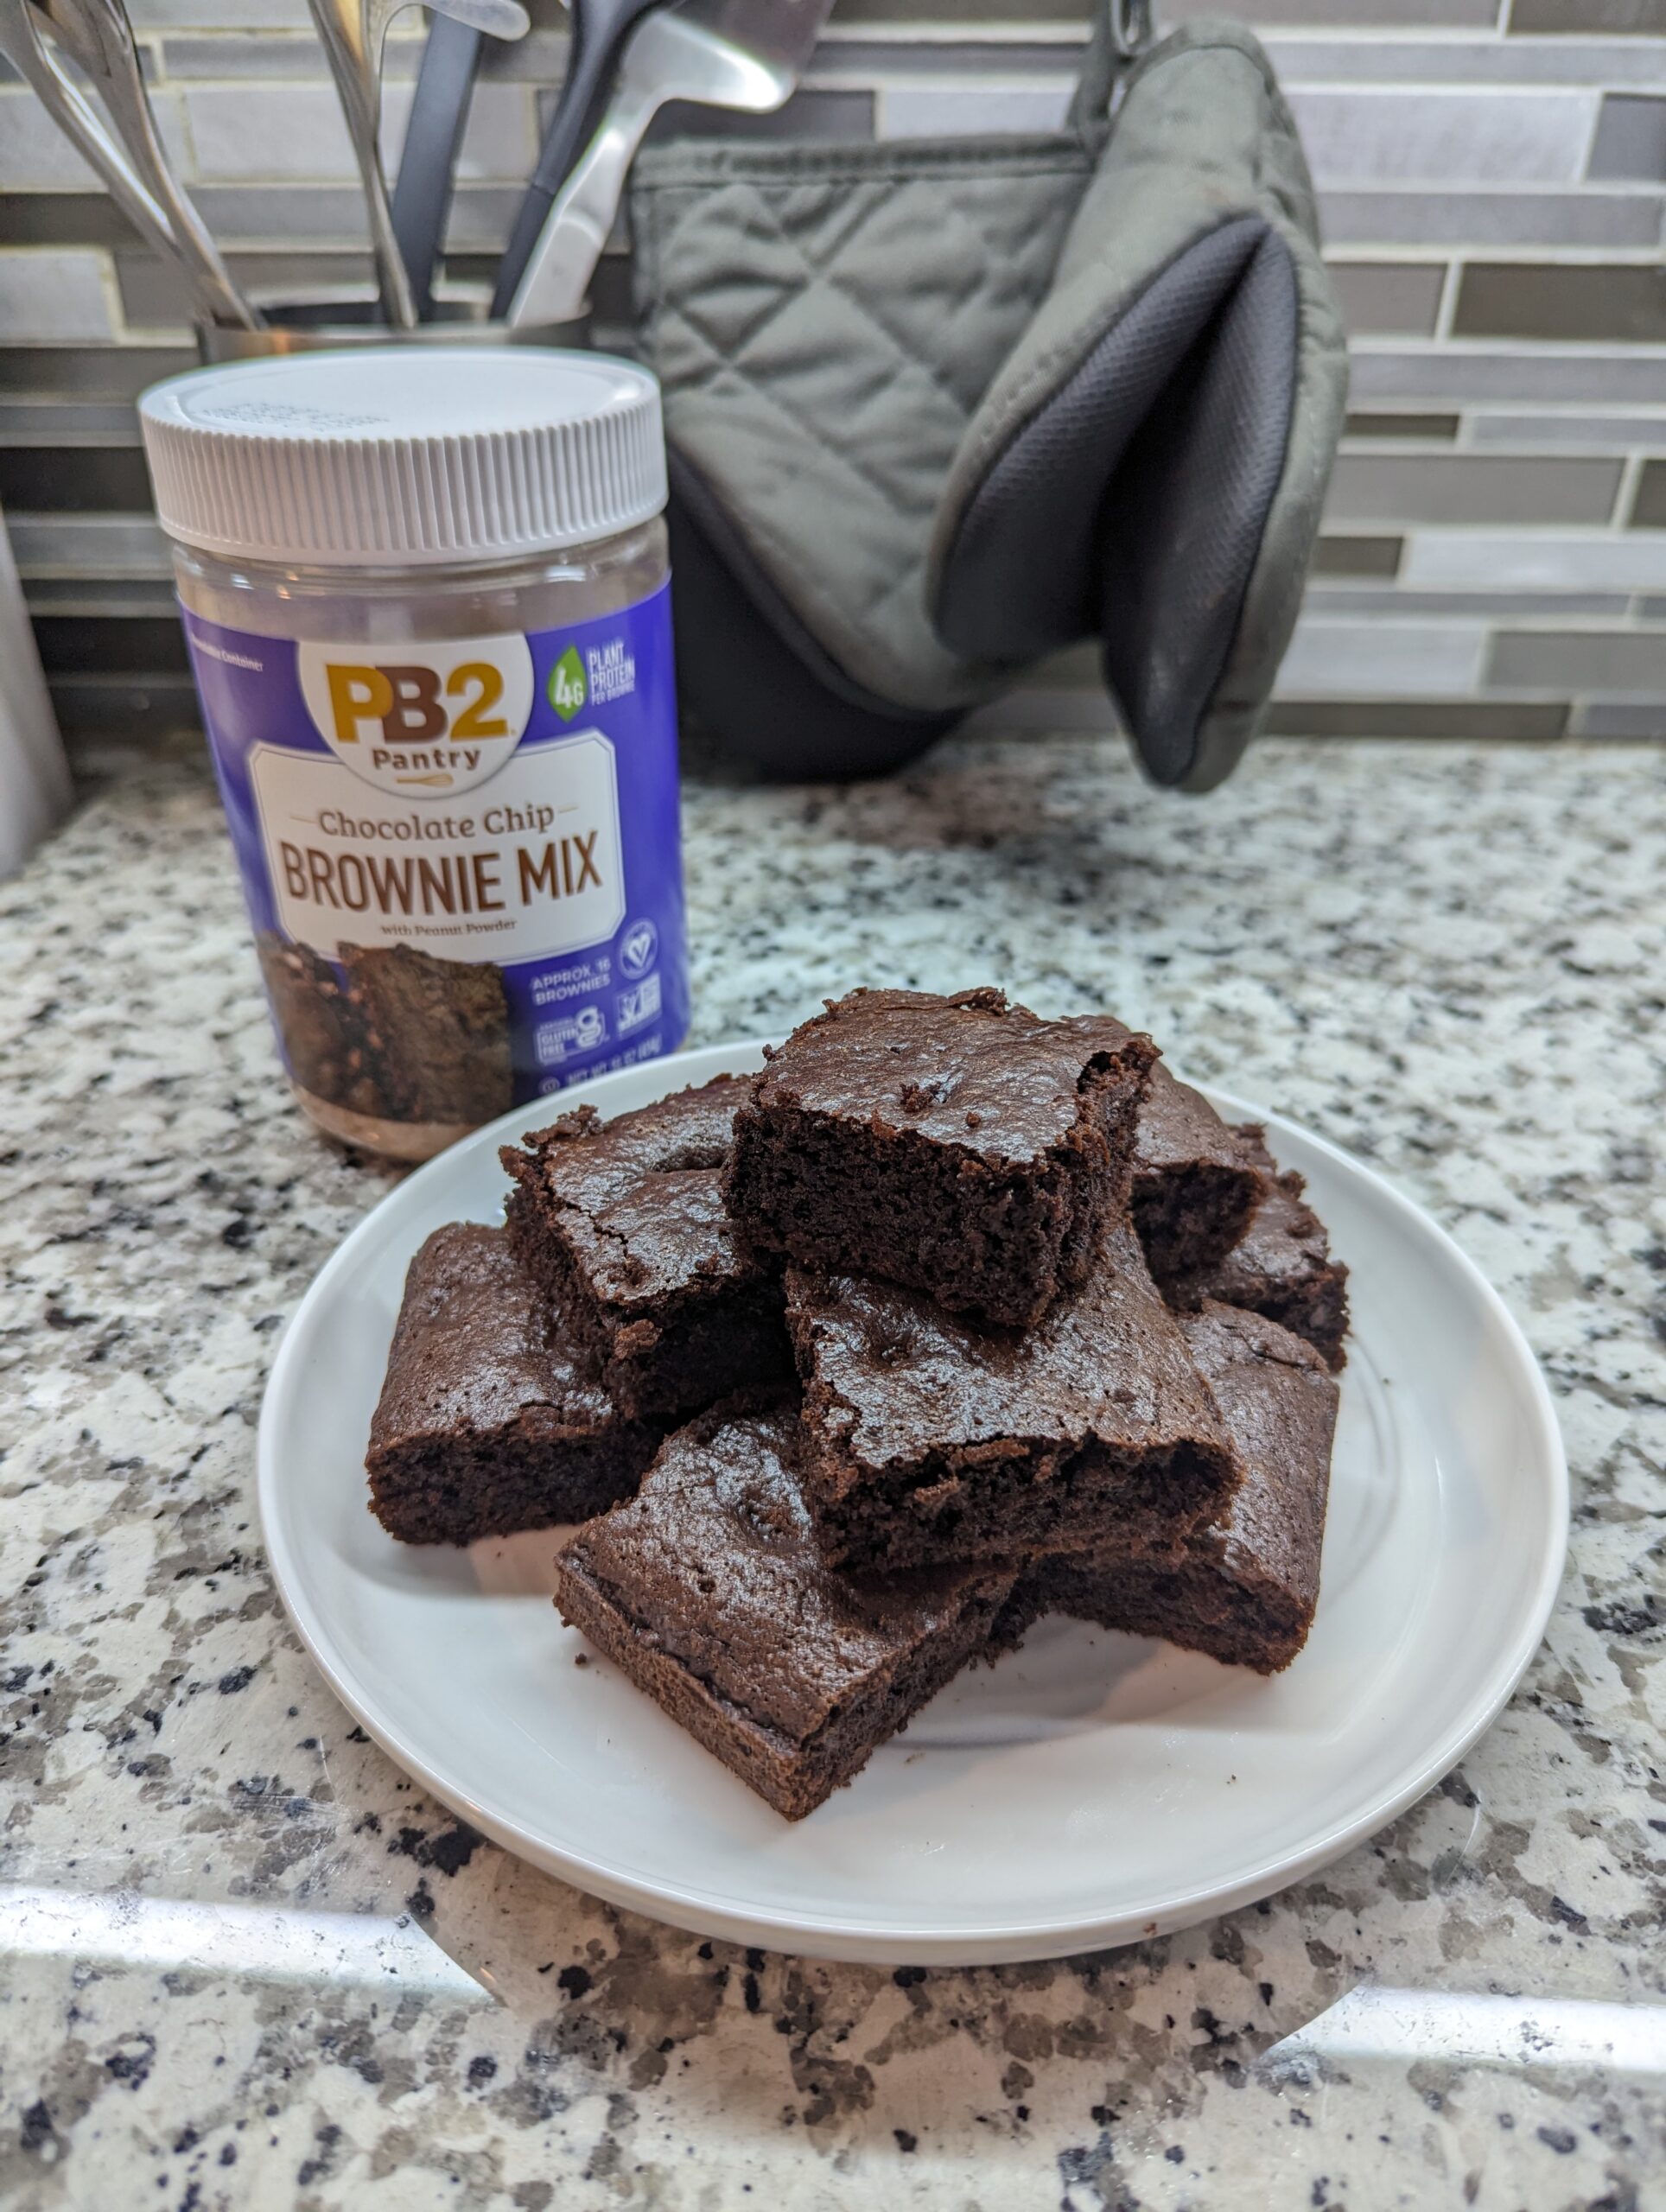 Testing out PB2 Pantry’s Chocolate Chip Brownie mix